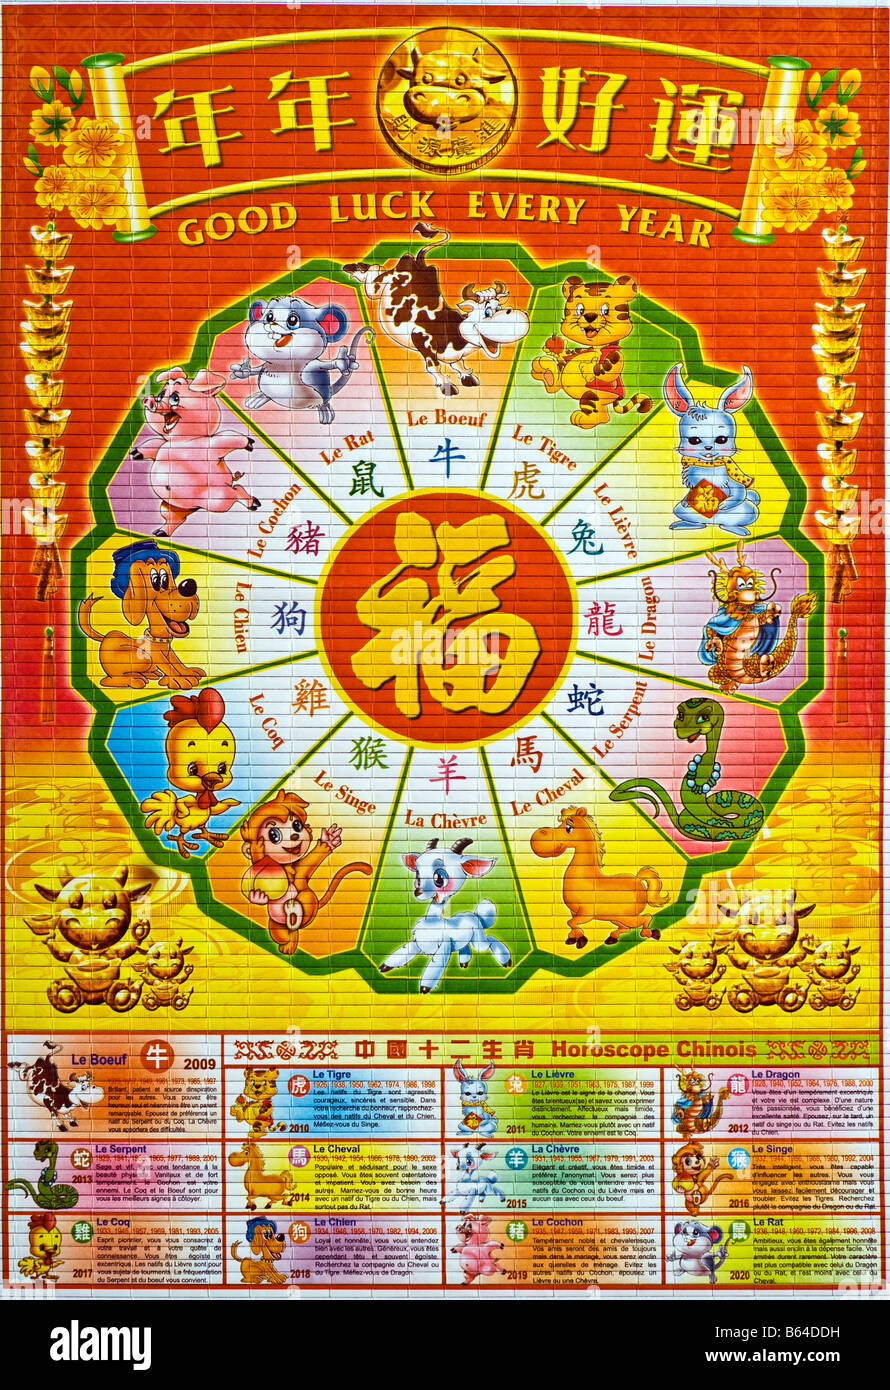 Chinese Contemporary Art 'Chinese Astrological Calendar' with illustrations Zodiac Stock Photo